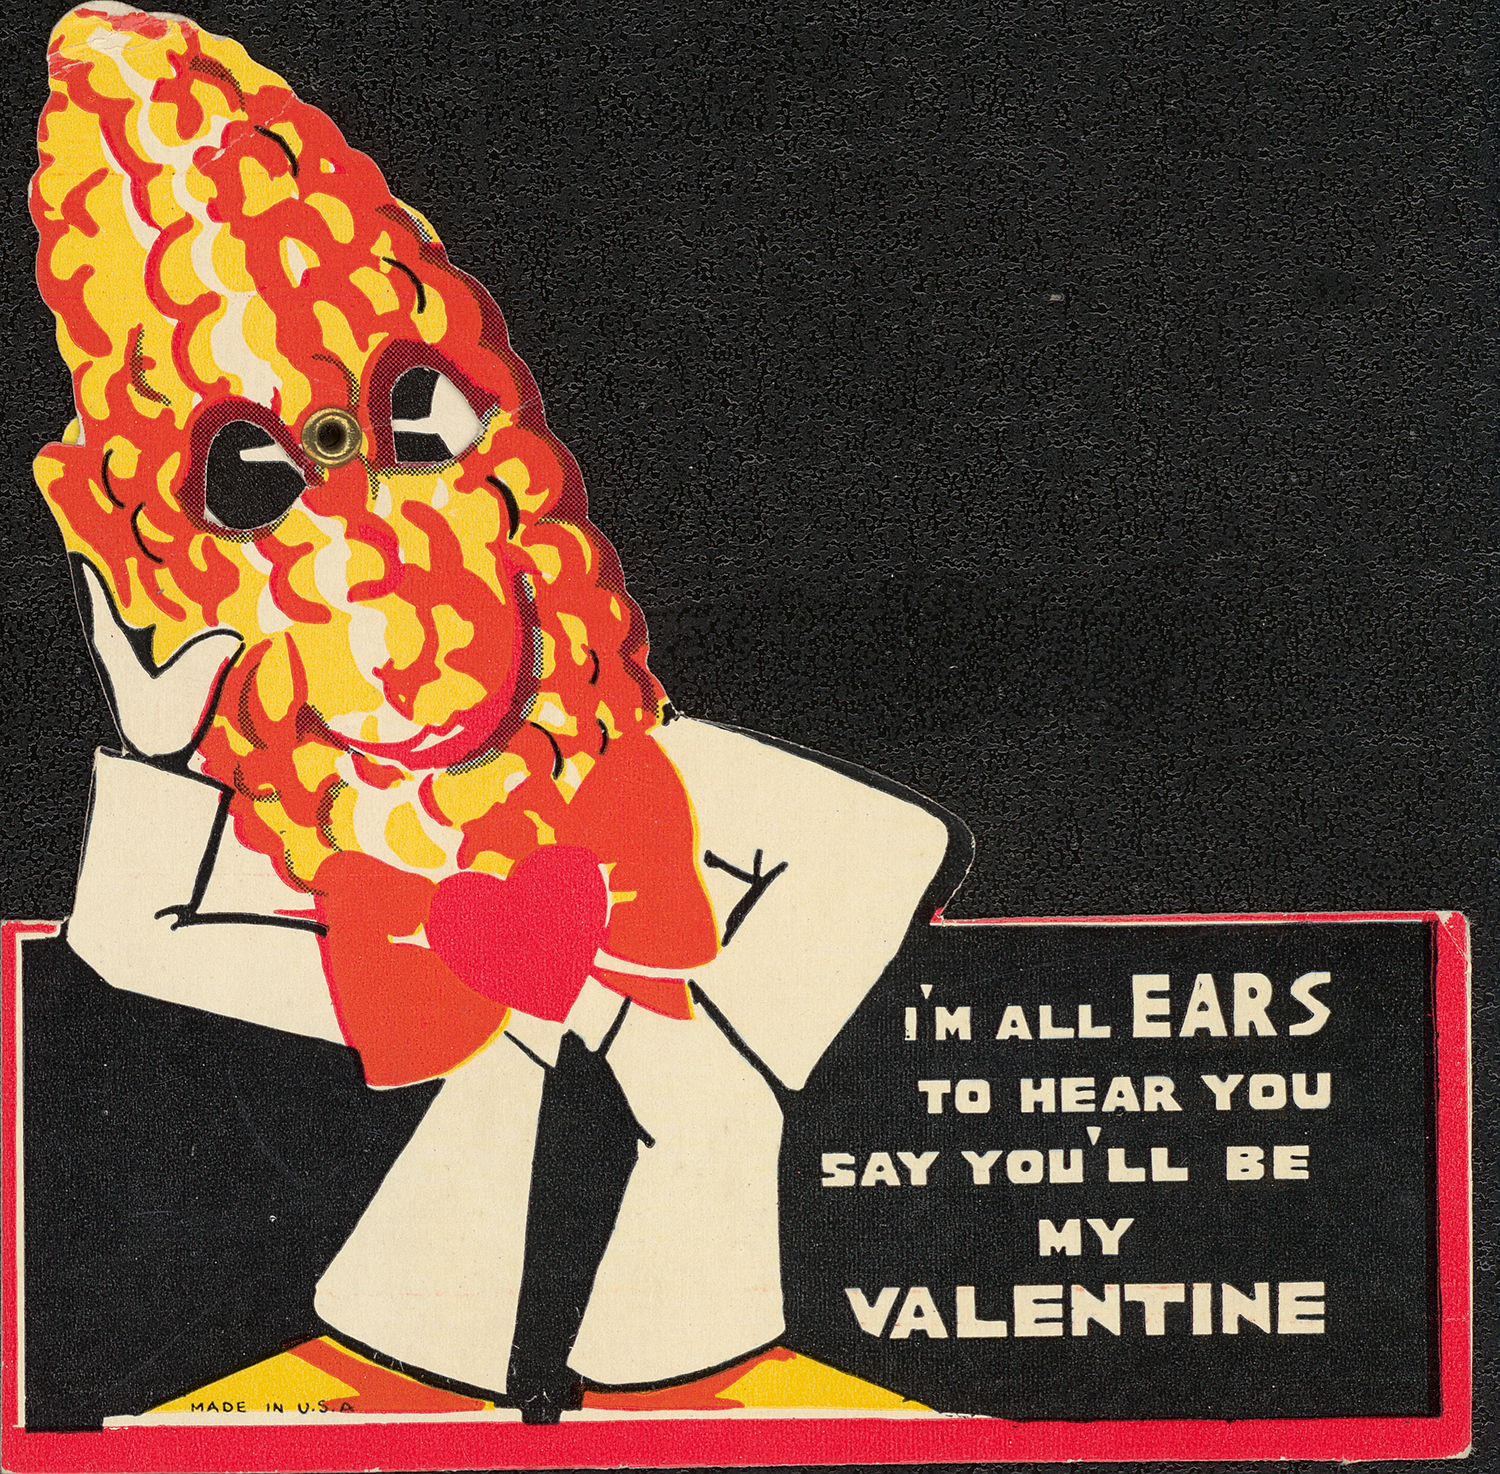 "I'm all ears to hear you say you'll be my valentine."